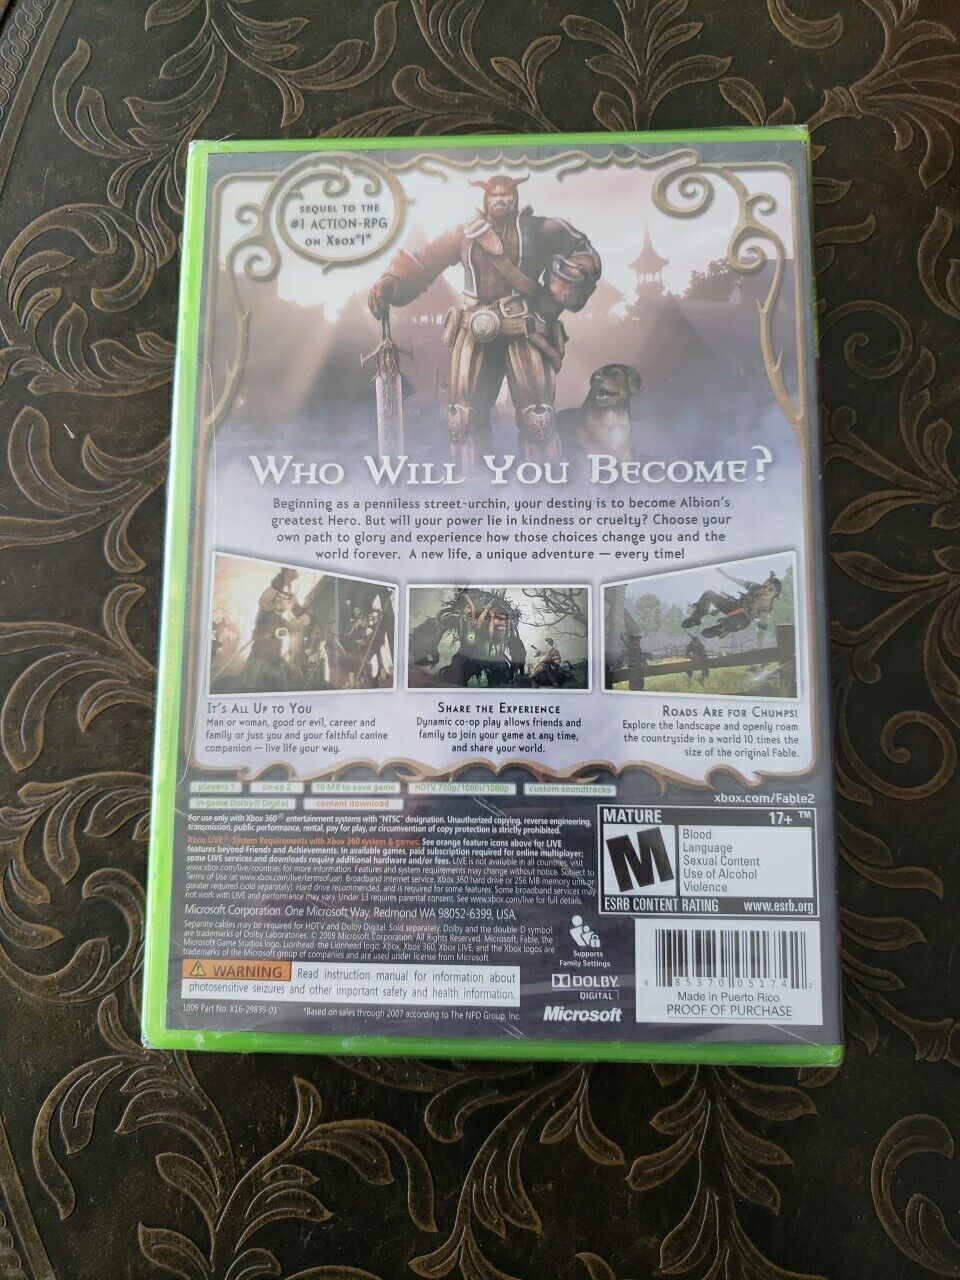 Fable II / 2 (Xbox 360) Not For Resale Edition / Brand New & Factory Sealed